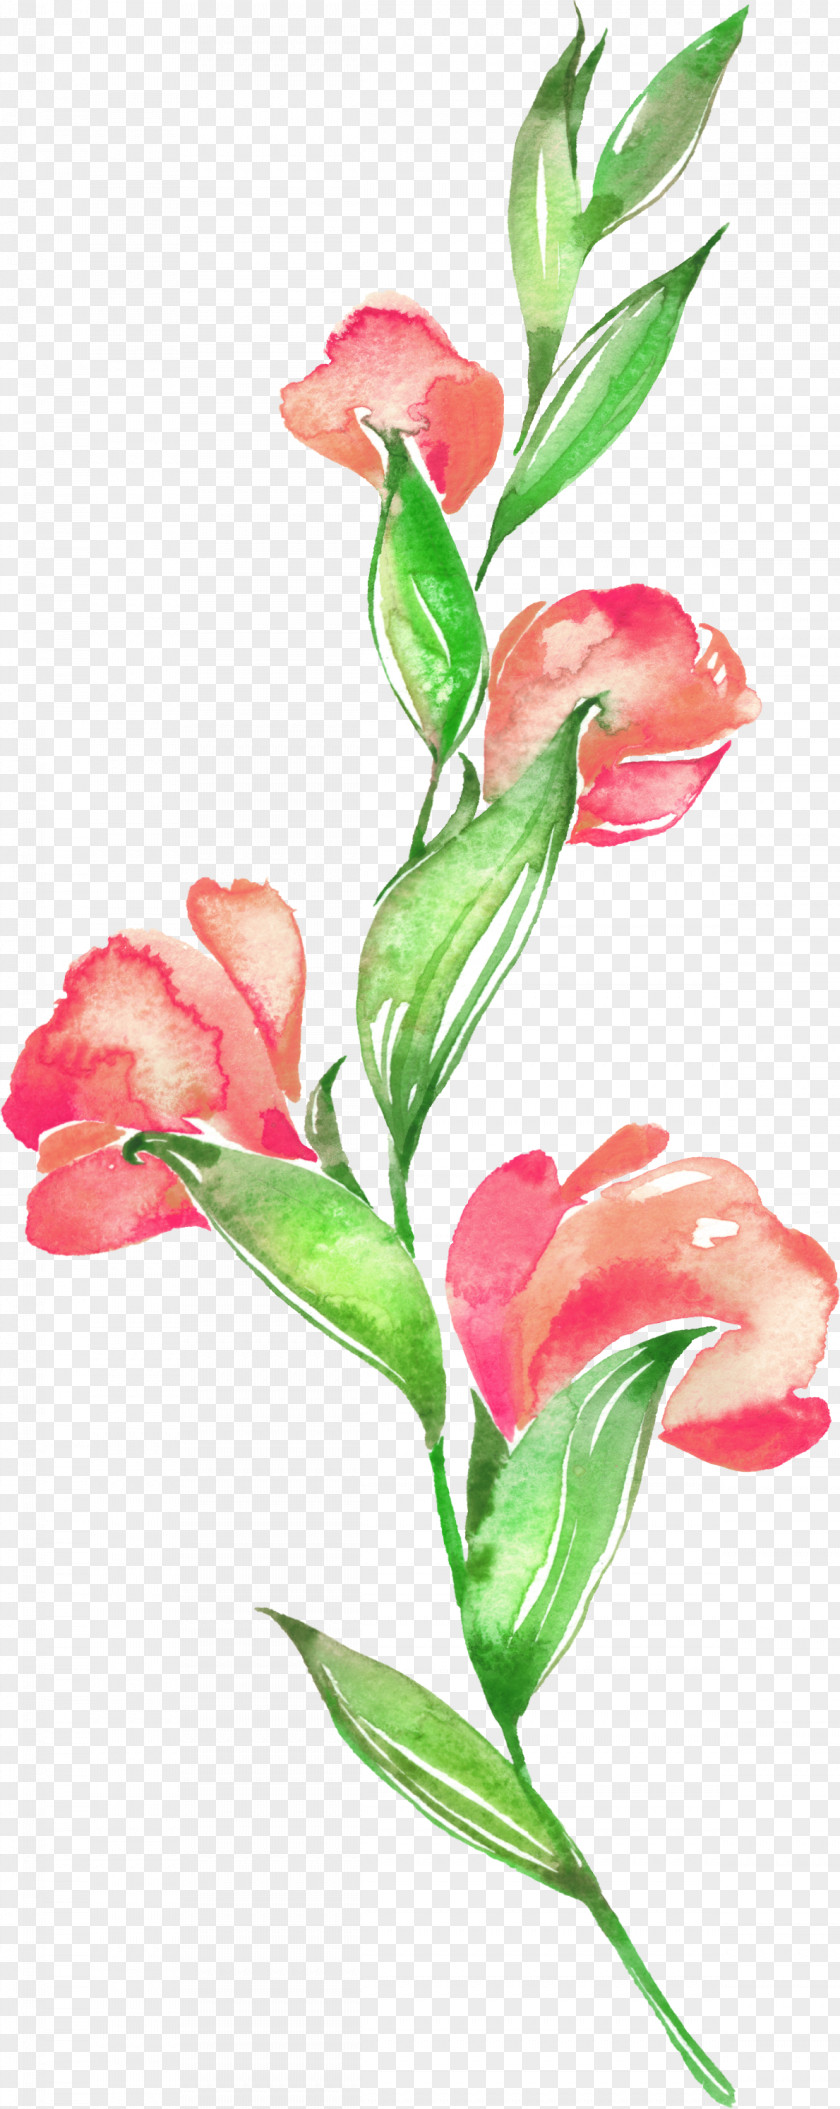 Floral Material Background Design Flower Watercolor Painting PNG